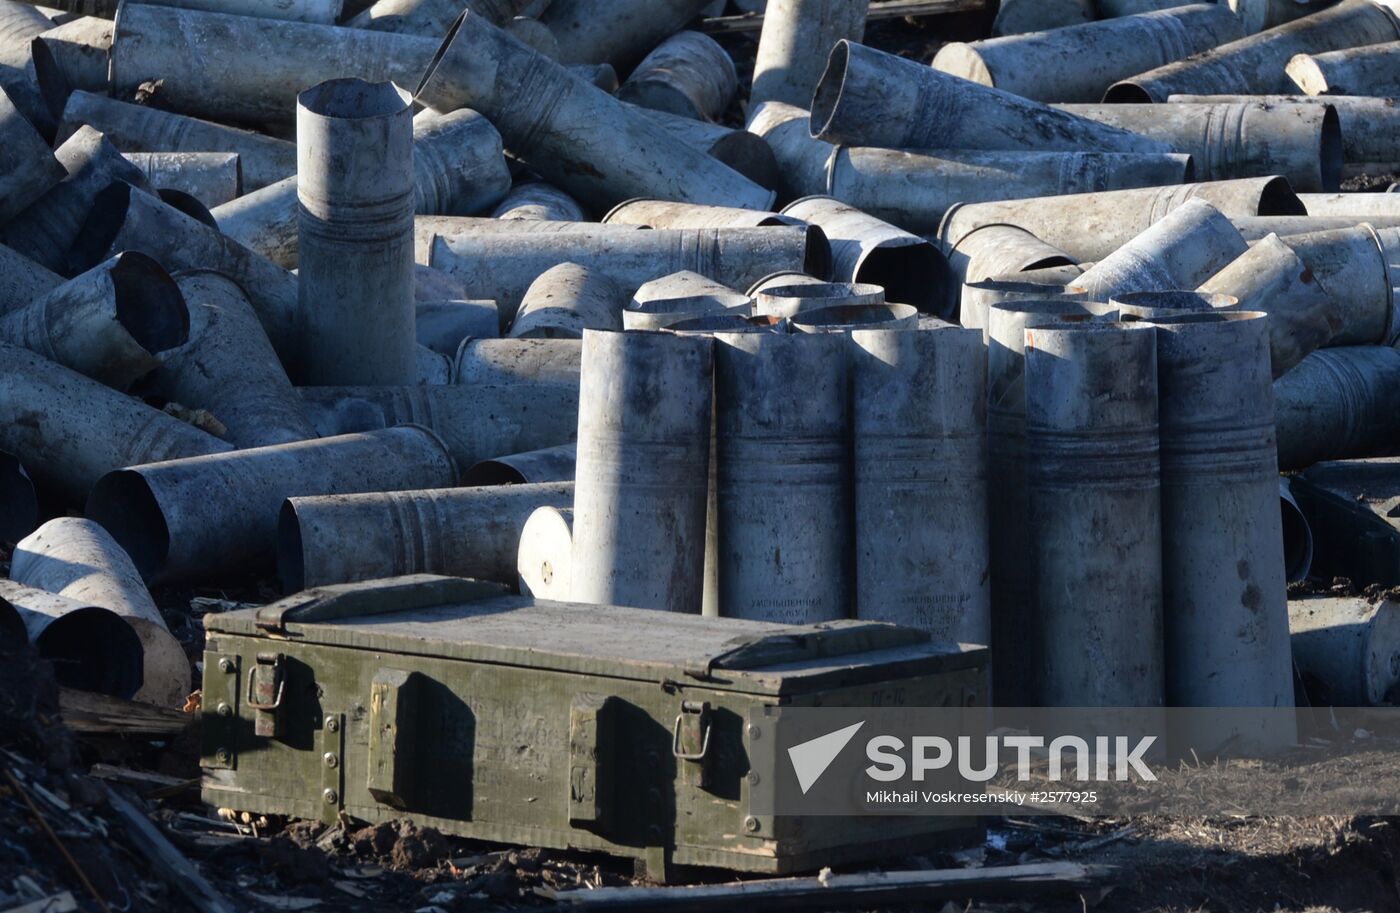 Destroyed fortified area of Ukrainian Armed Forces on the outskirts of Debaltseve